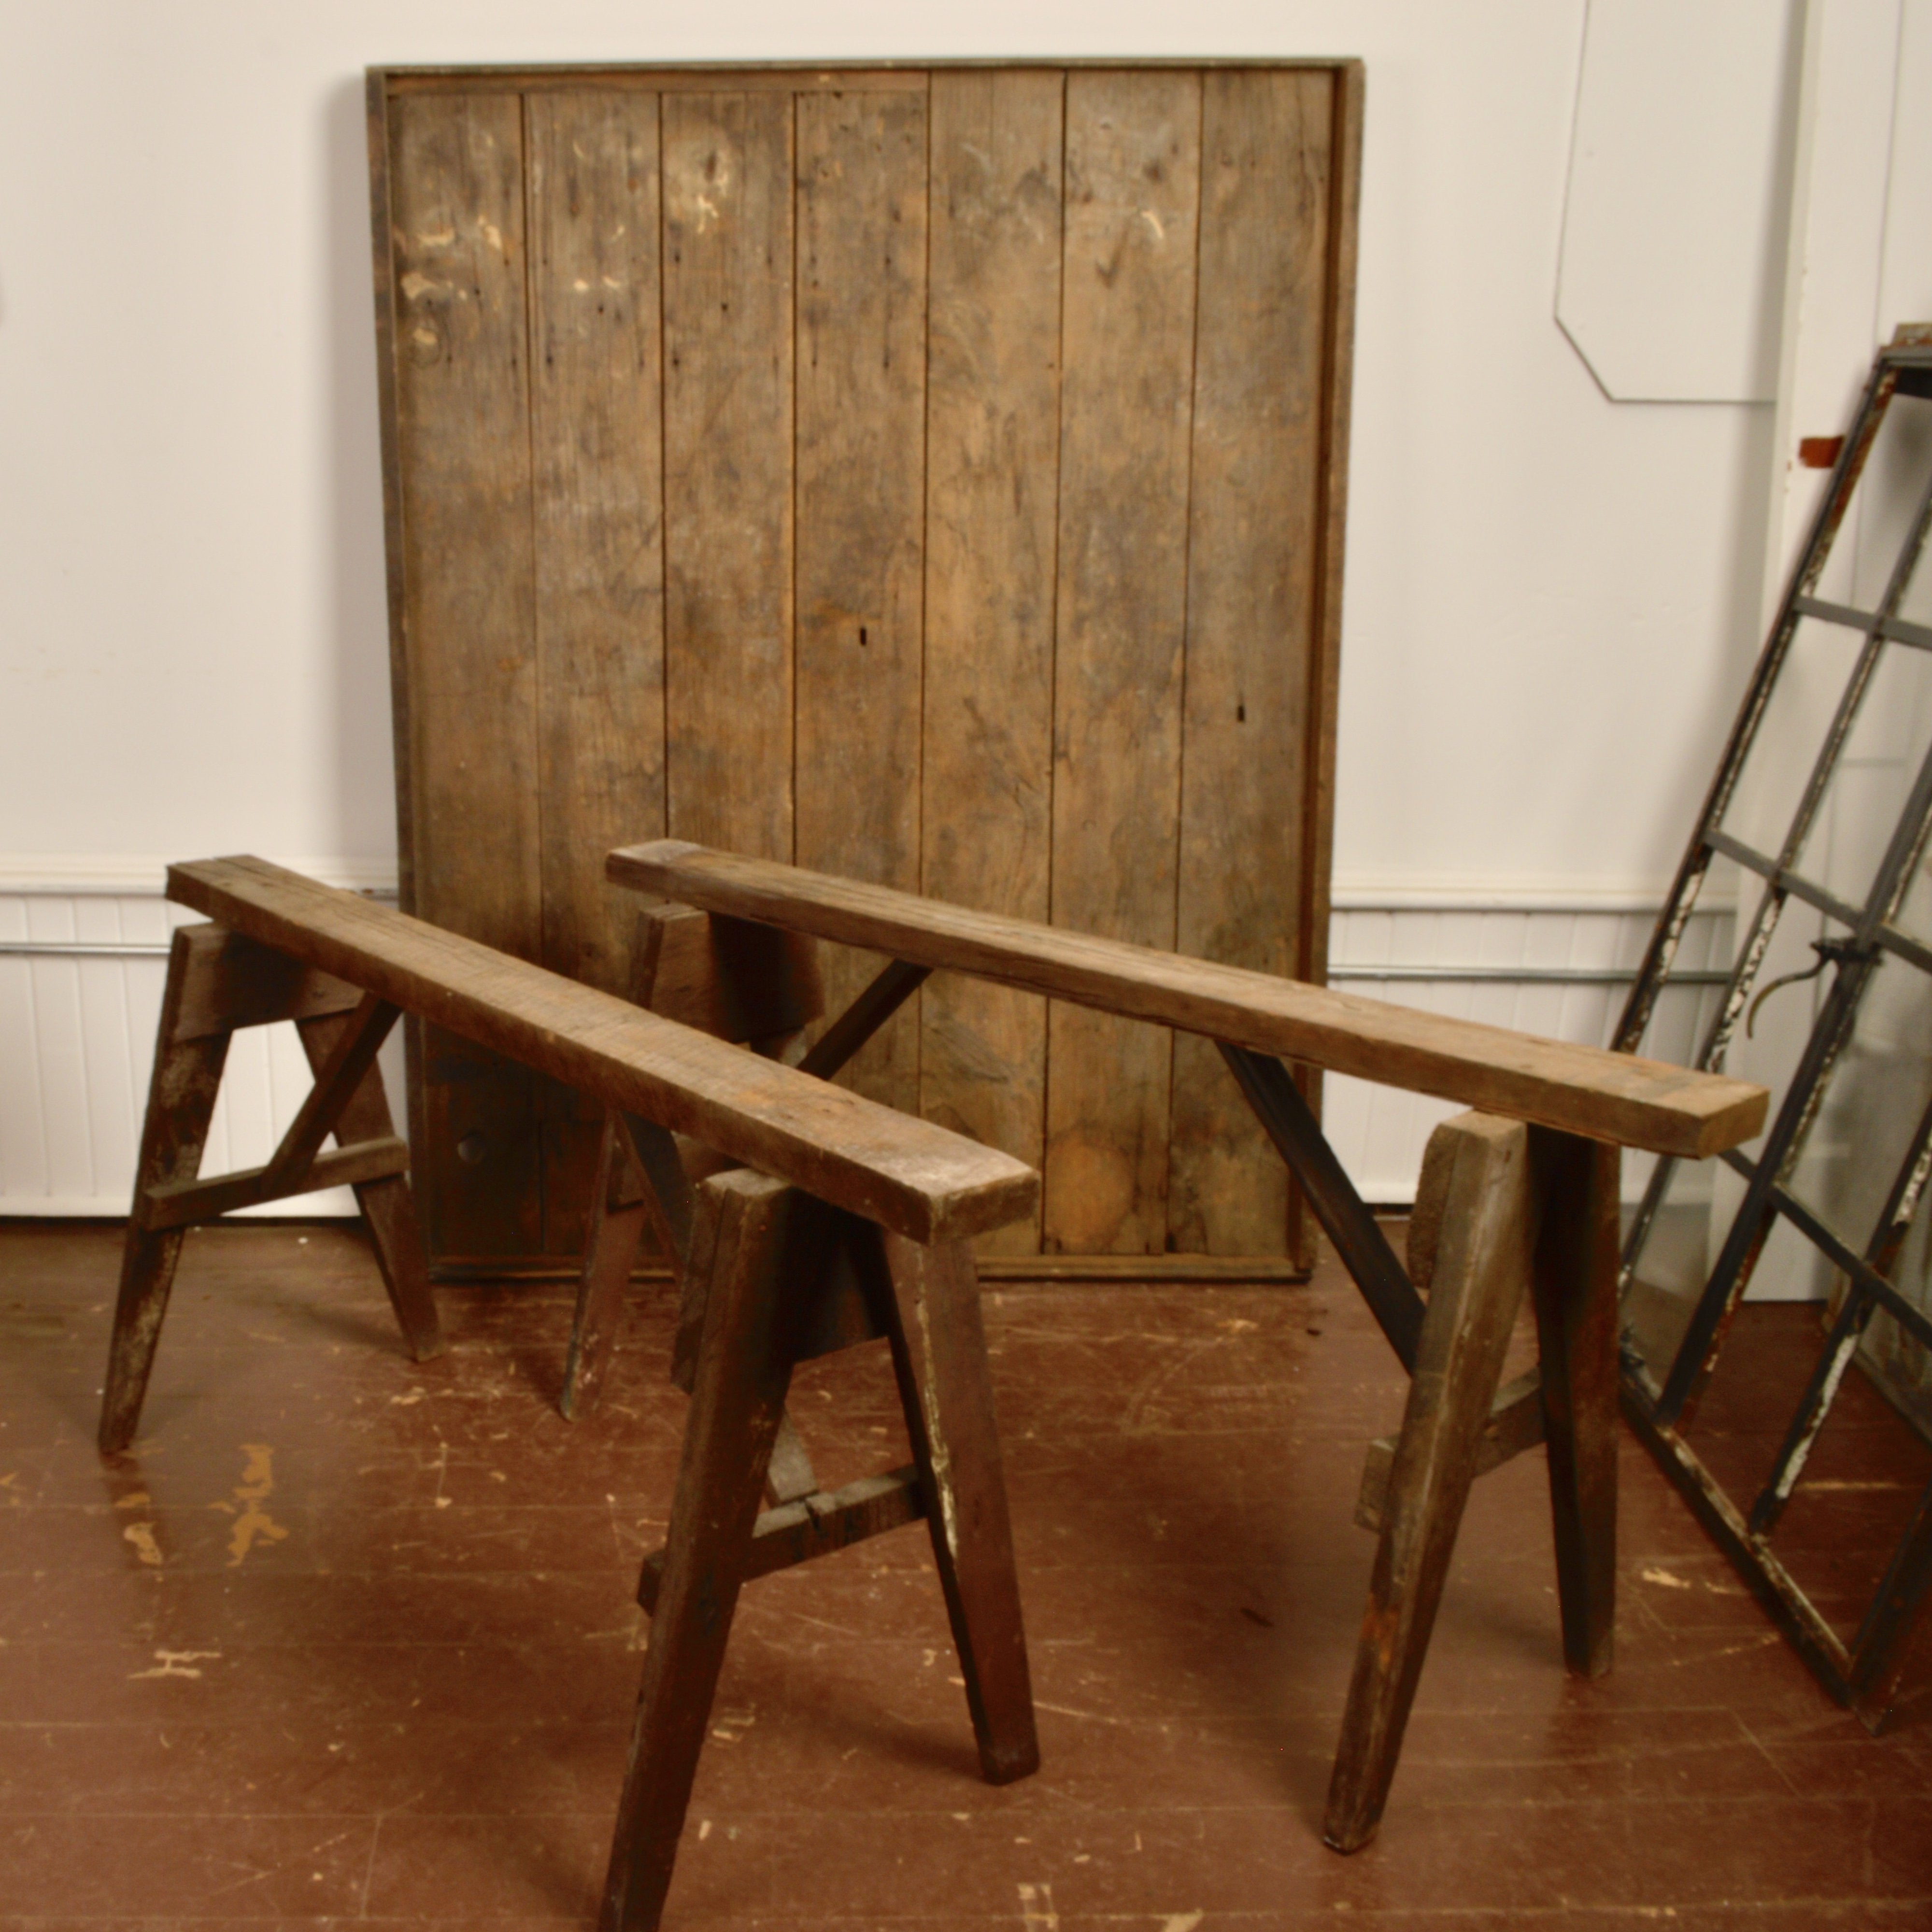 Antique Potting Shed Table Salvage-Garden